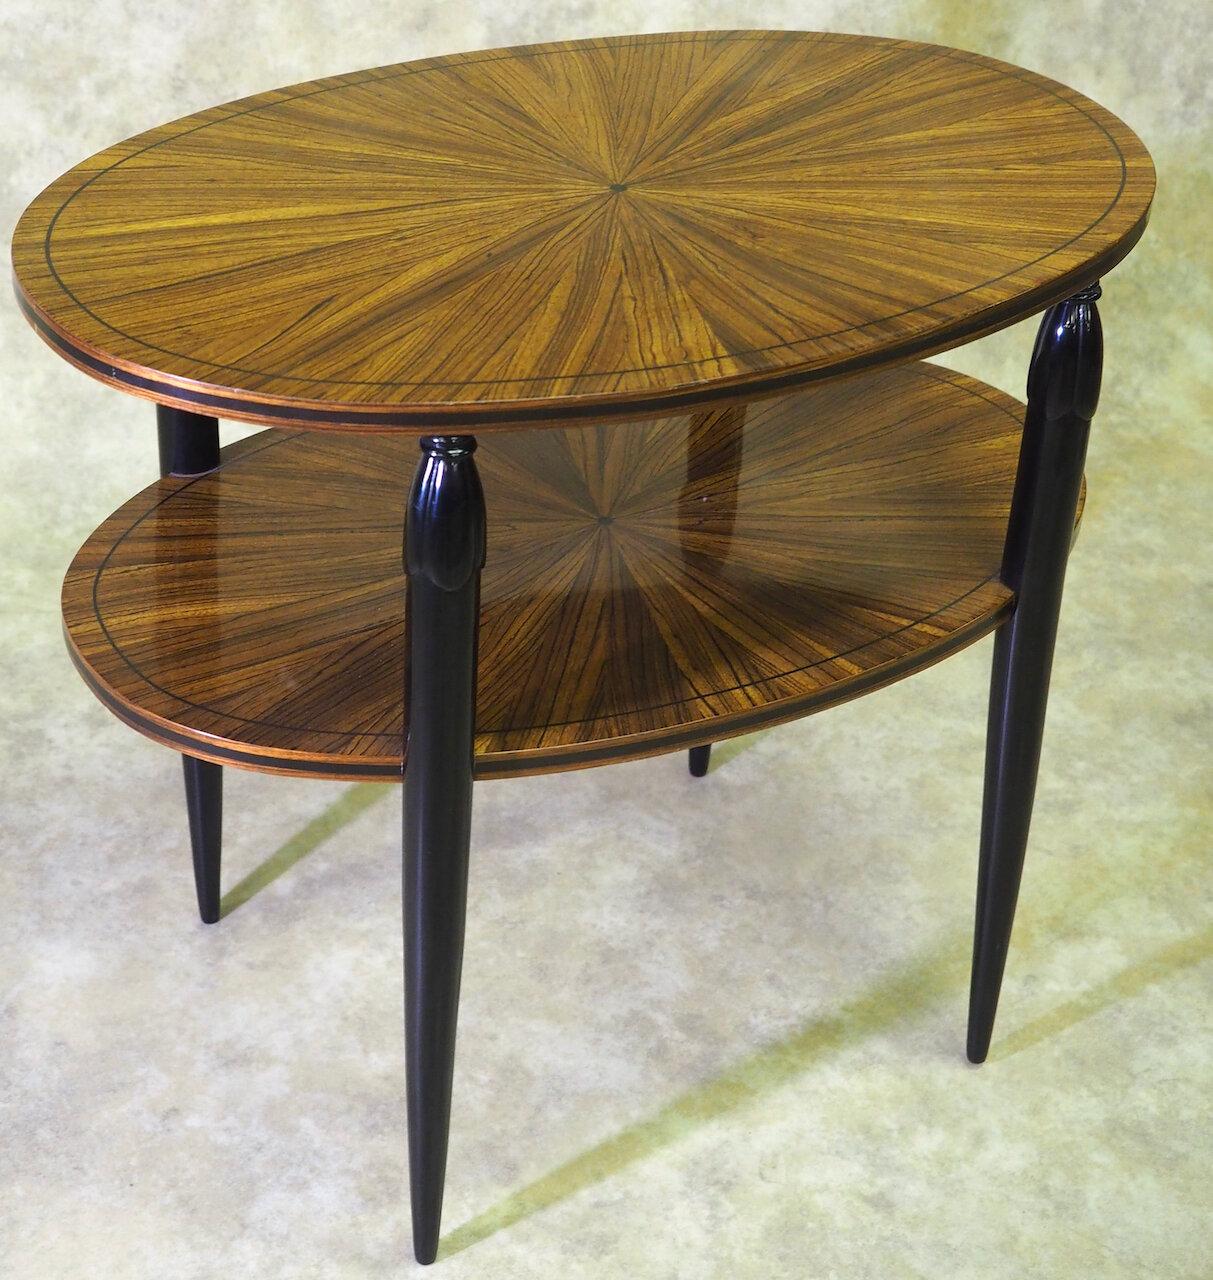 Classic French Art Deco side/end/center table attributed to Maurice Dufrene, circa 1920. Sunburst-pattern top in exotic hardwood with narrow ebonized inlay. Ebonized sculpted legs. 31.5” long x 25” wide x 27” high. Restored and